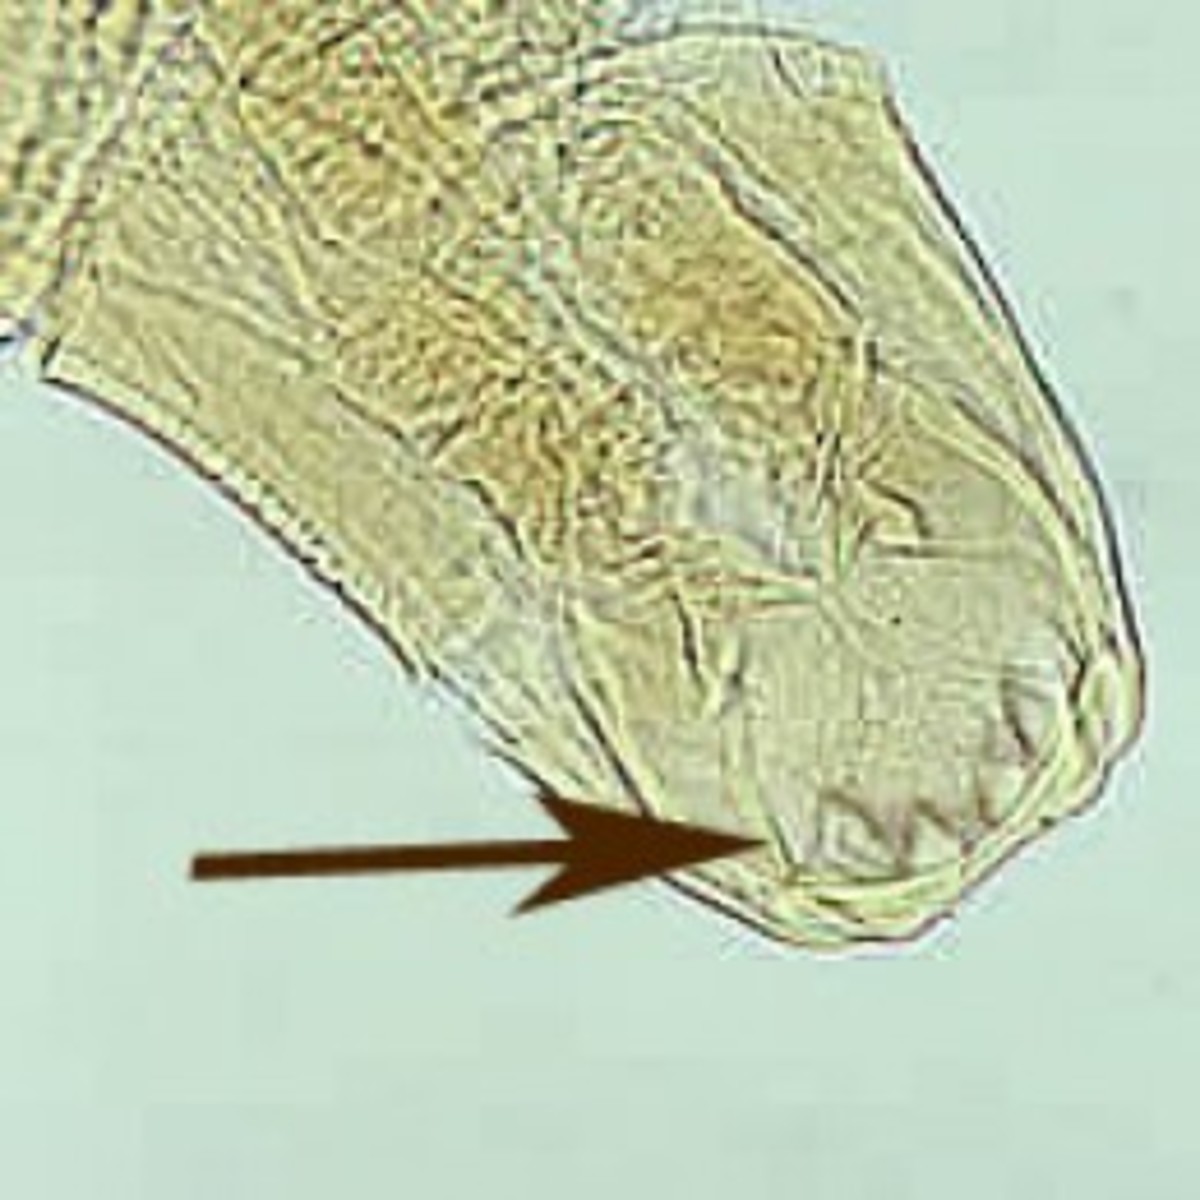 Hookworm mouth (note the hooks)